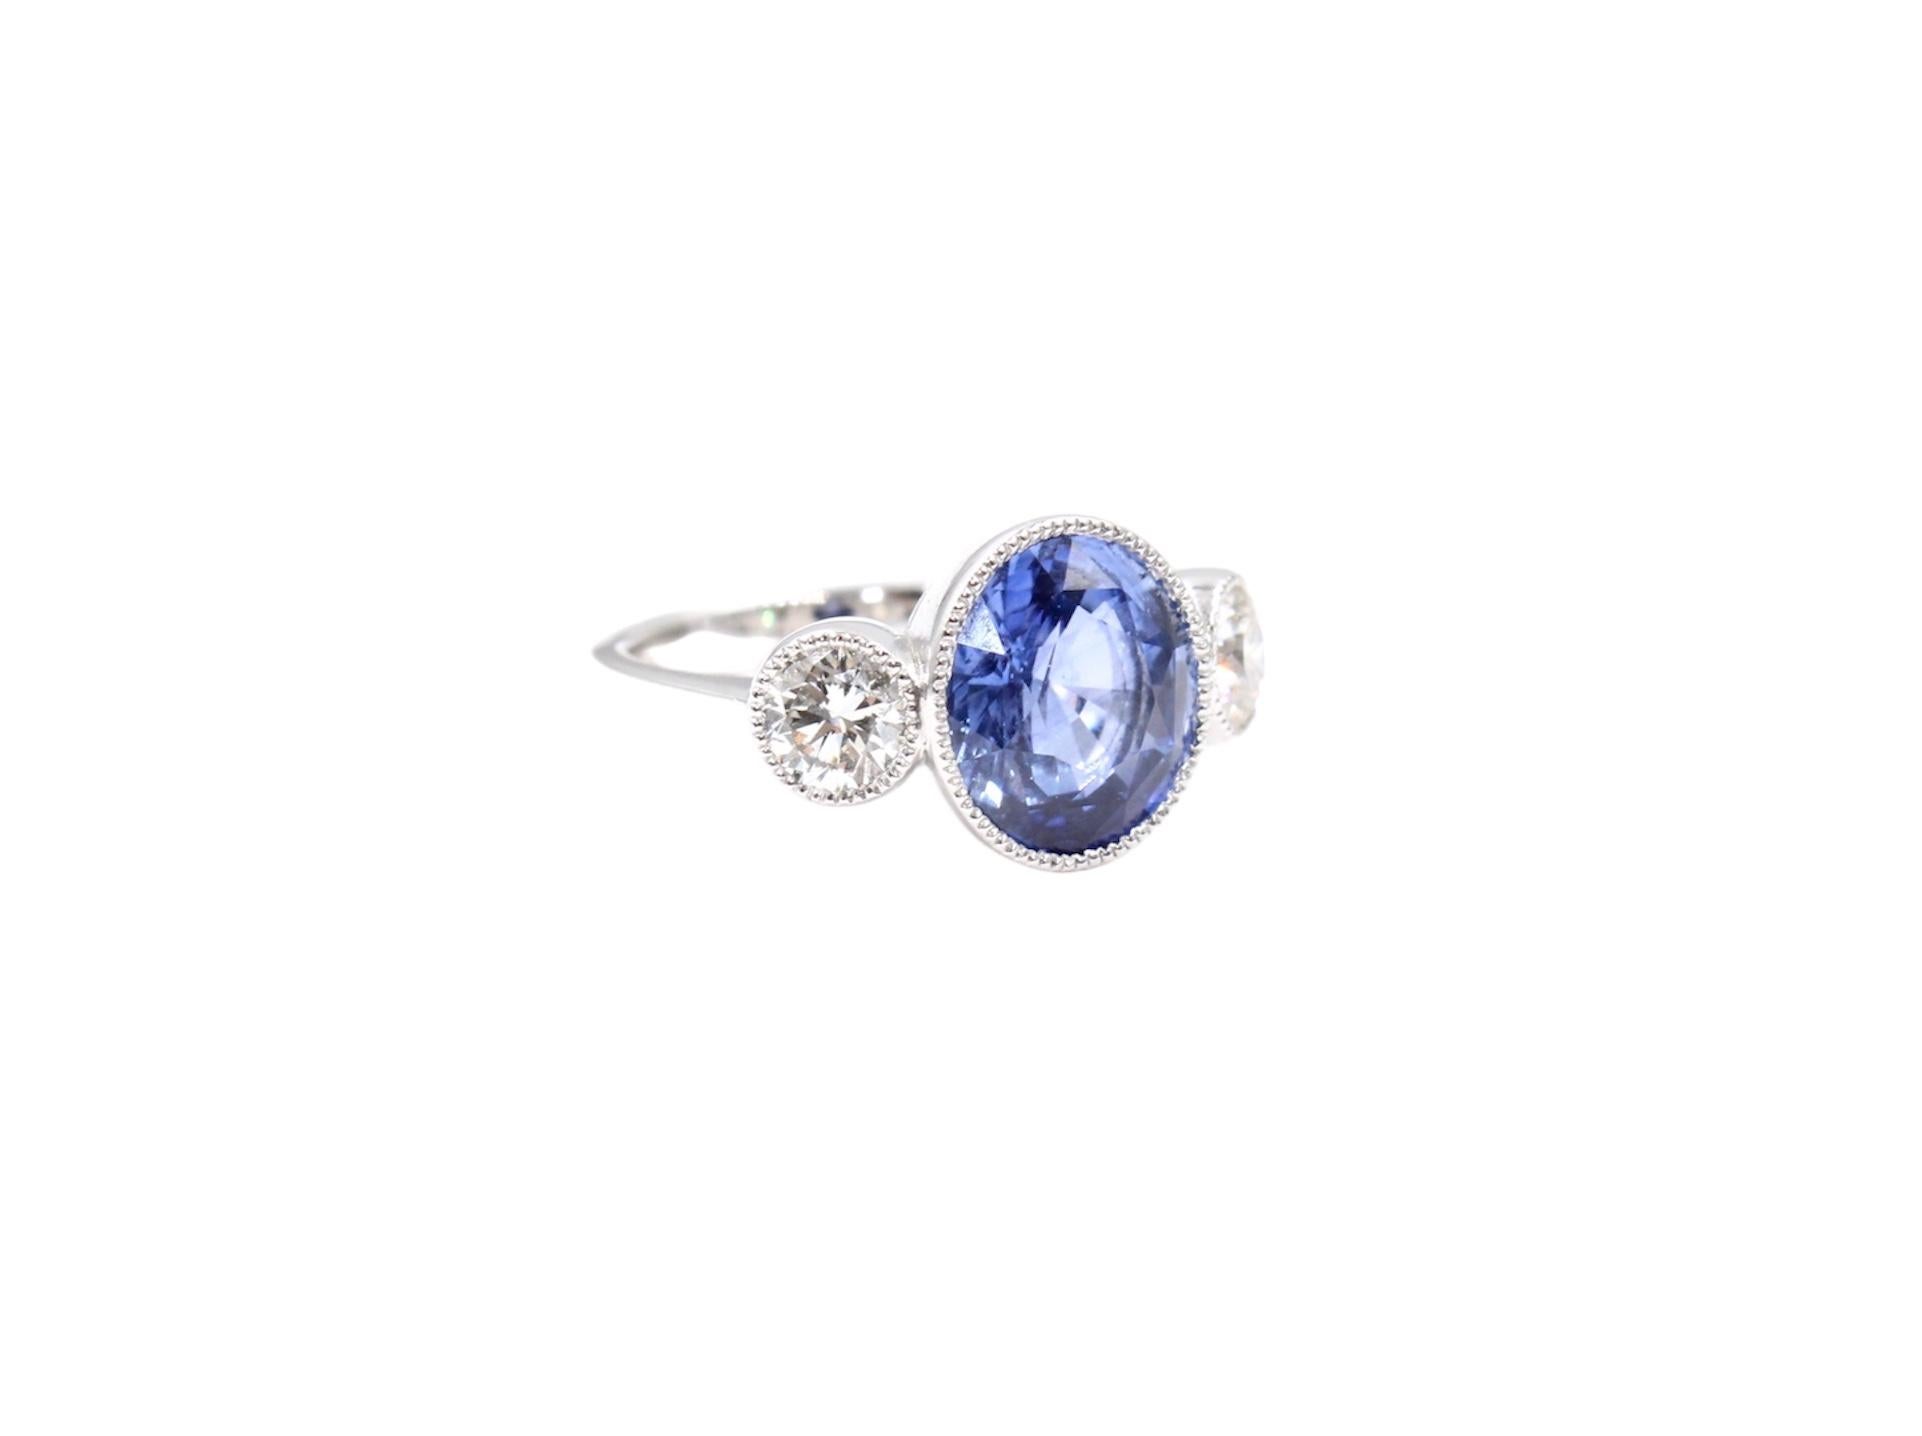 Ring made of gold 18k set with an oval shape Ceylon deep blue sapphire of 5.13 Carats and two side diamonds of 0.93 Carats total ( J colour - Vs clarity) 